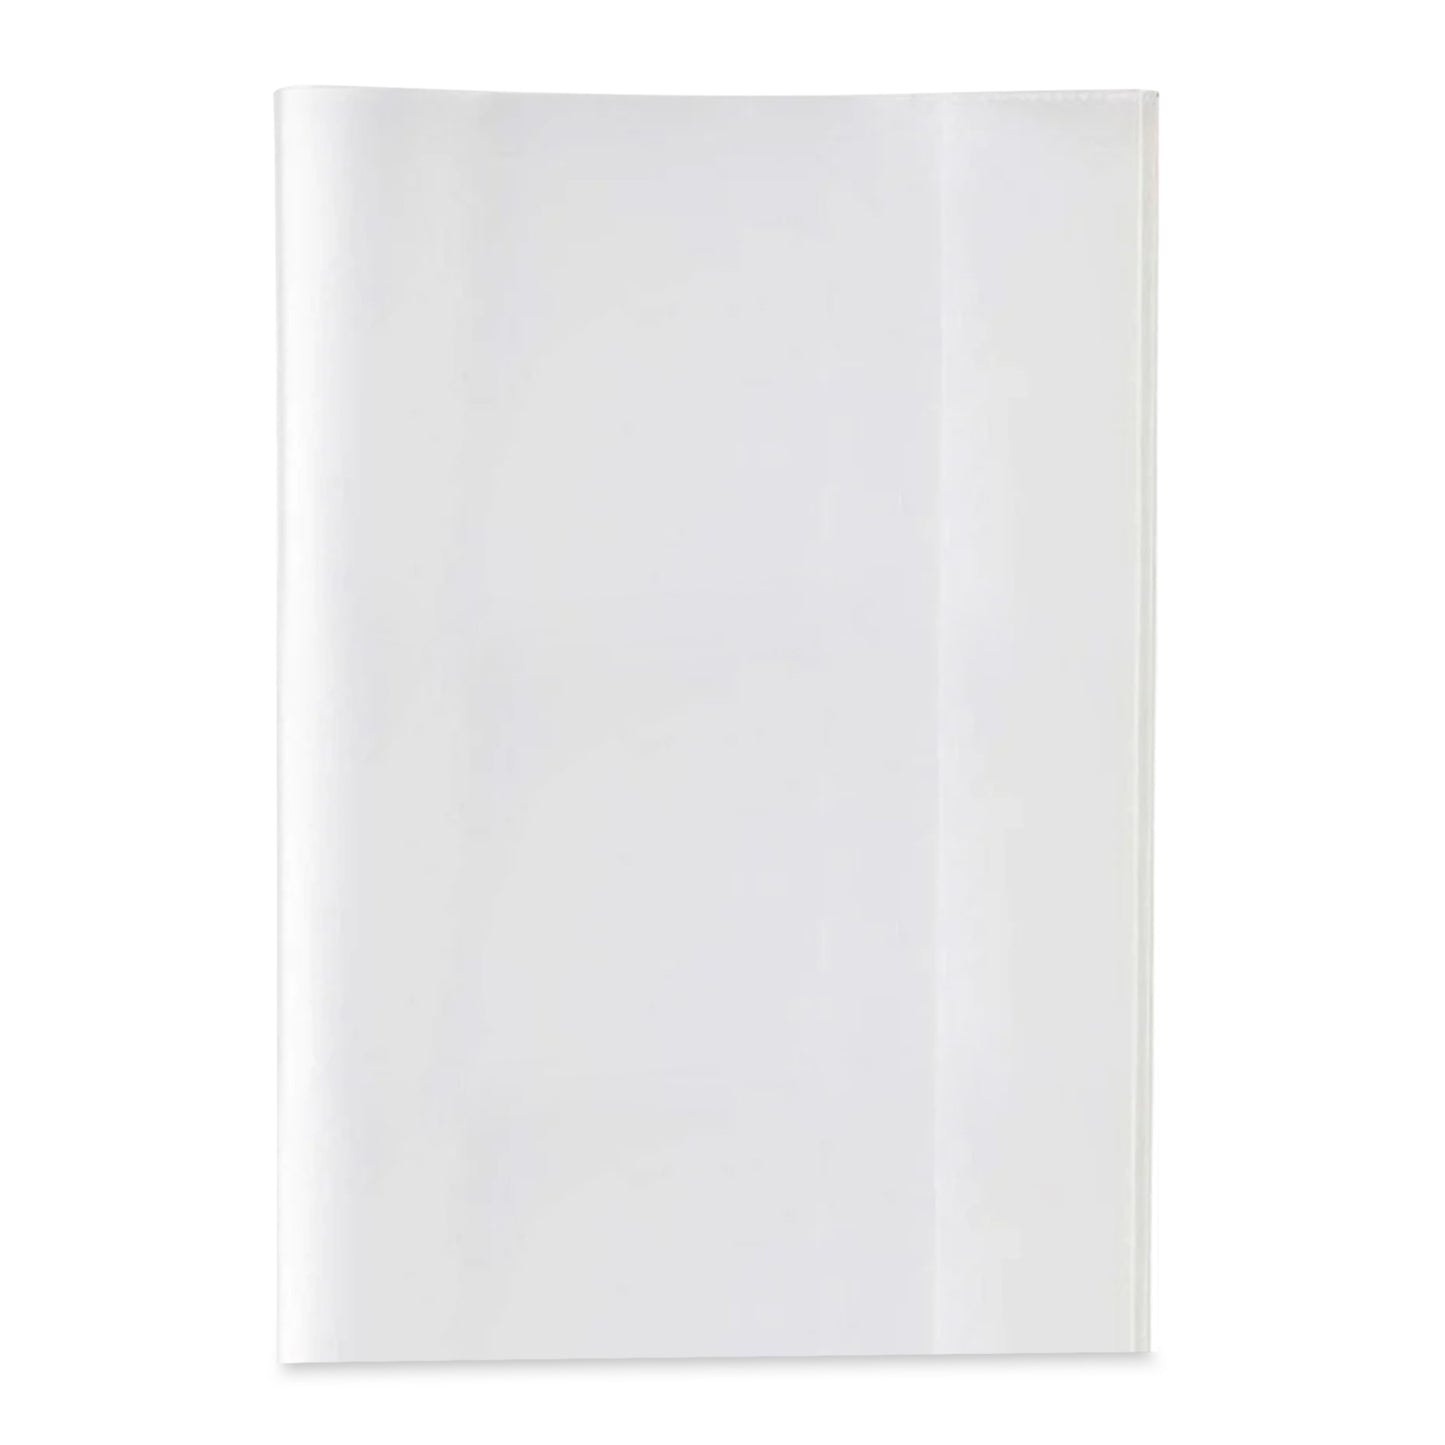 Pack of 10 A4 Clear Exercise Book Covers by Janrax